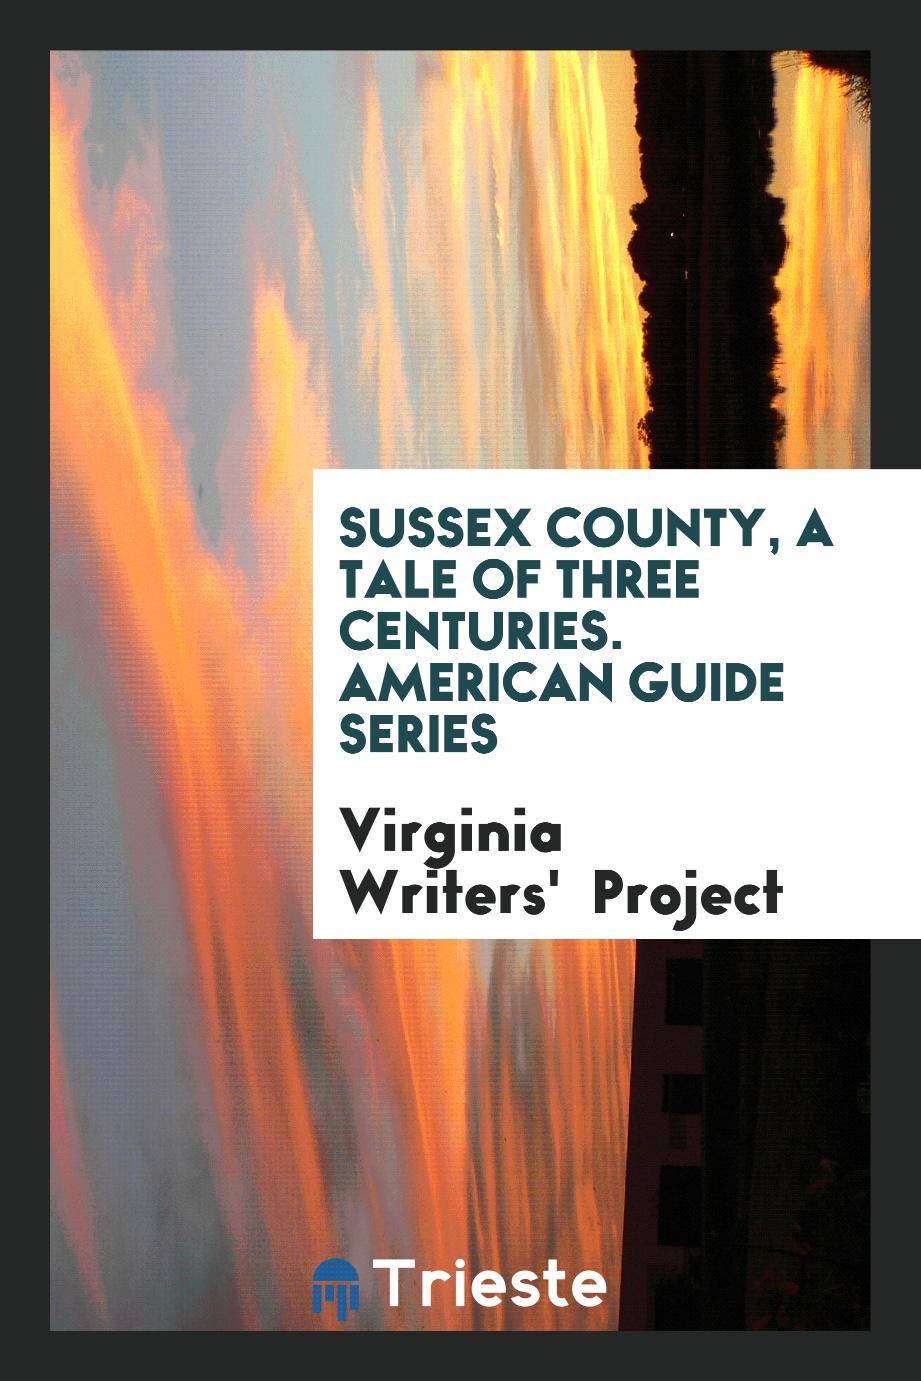 Sussex County, a Tale of Three Centuries. American Guide Series